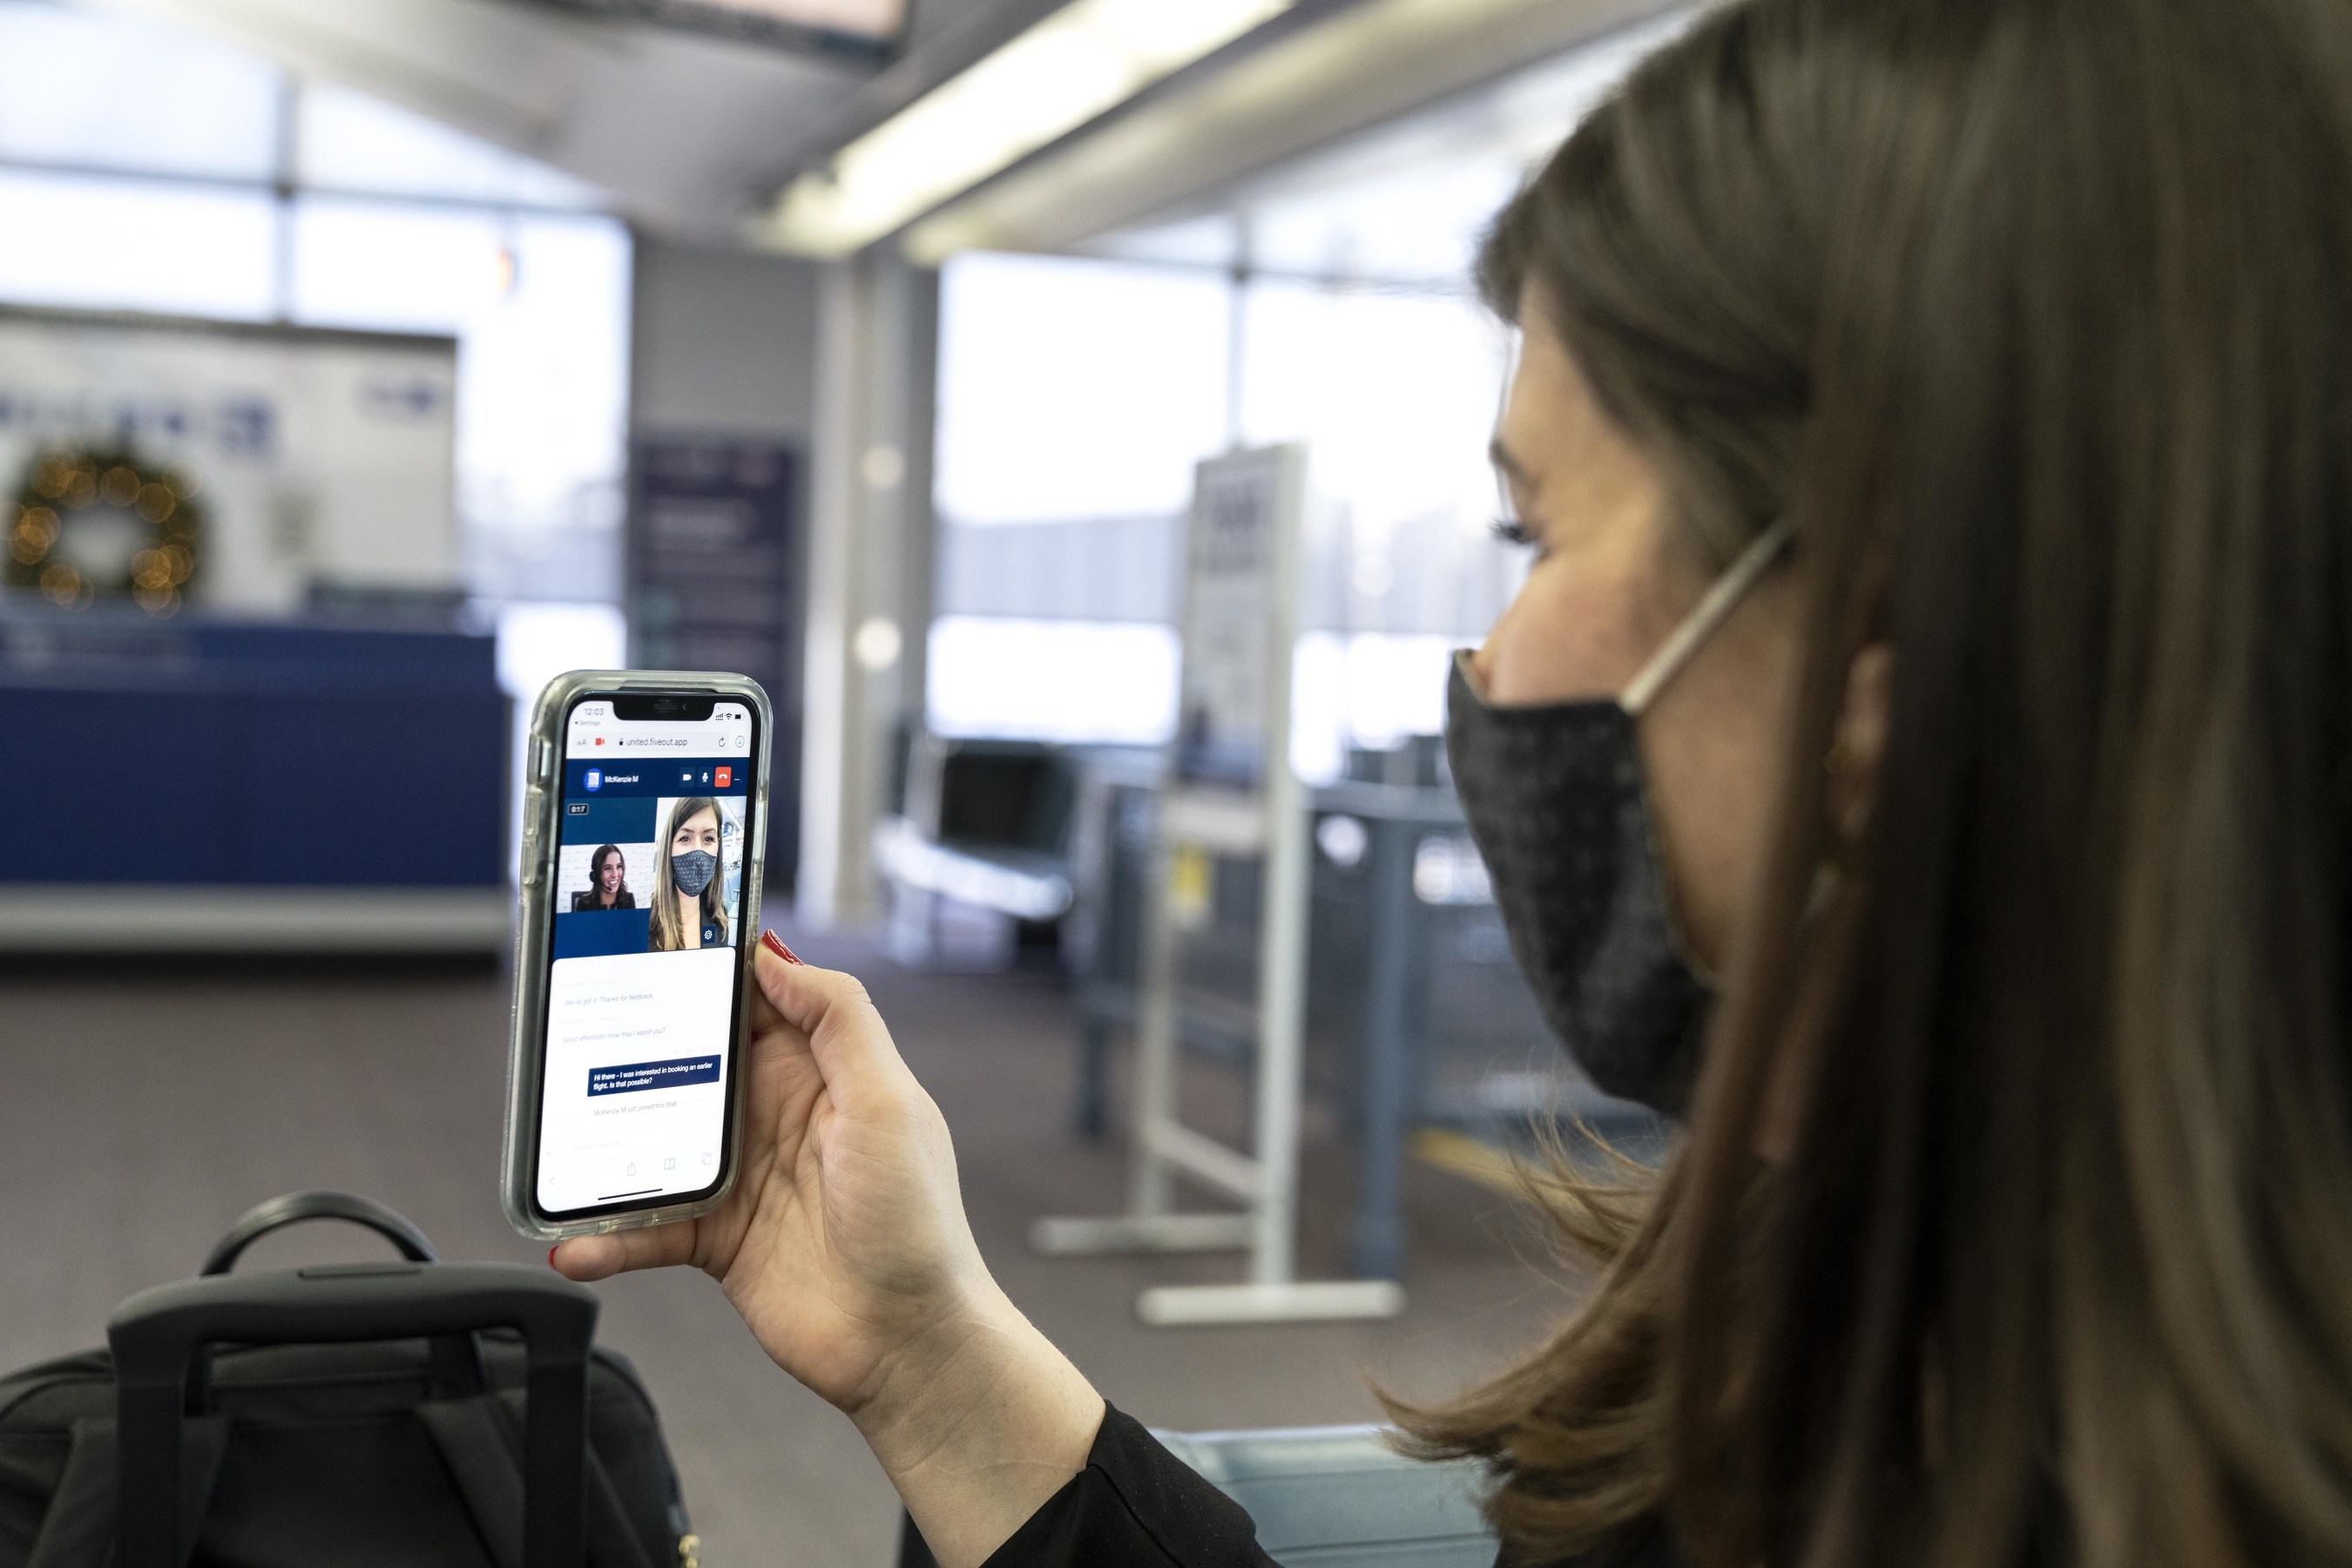 United Airlines' Agent on Demand can be accessed on any mobile device via a call, text or video chat, and has been trained to answer questions on everything from seat assignments to boarding times. Click to enlarge.